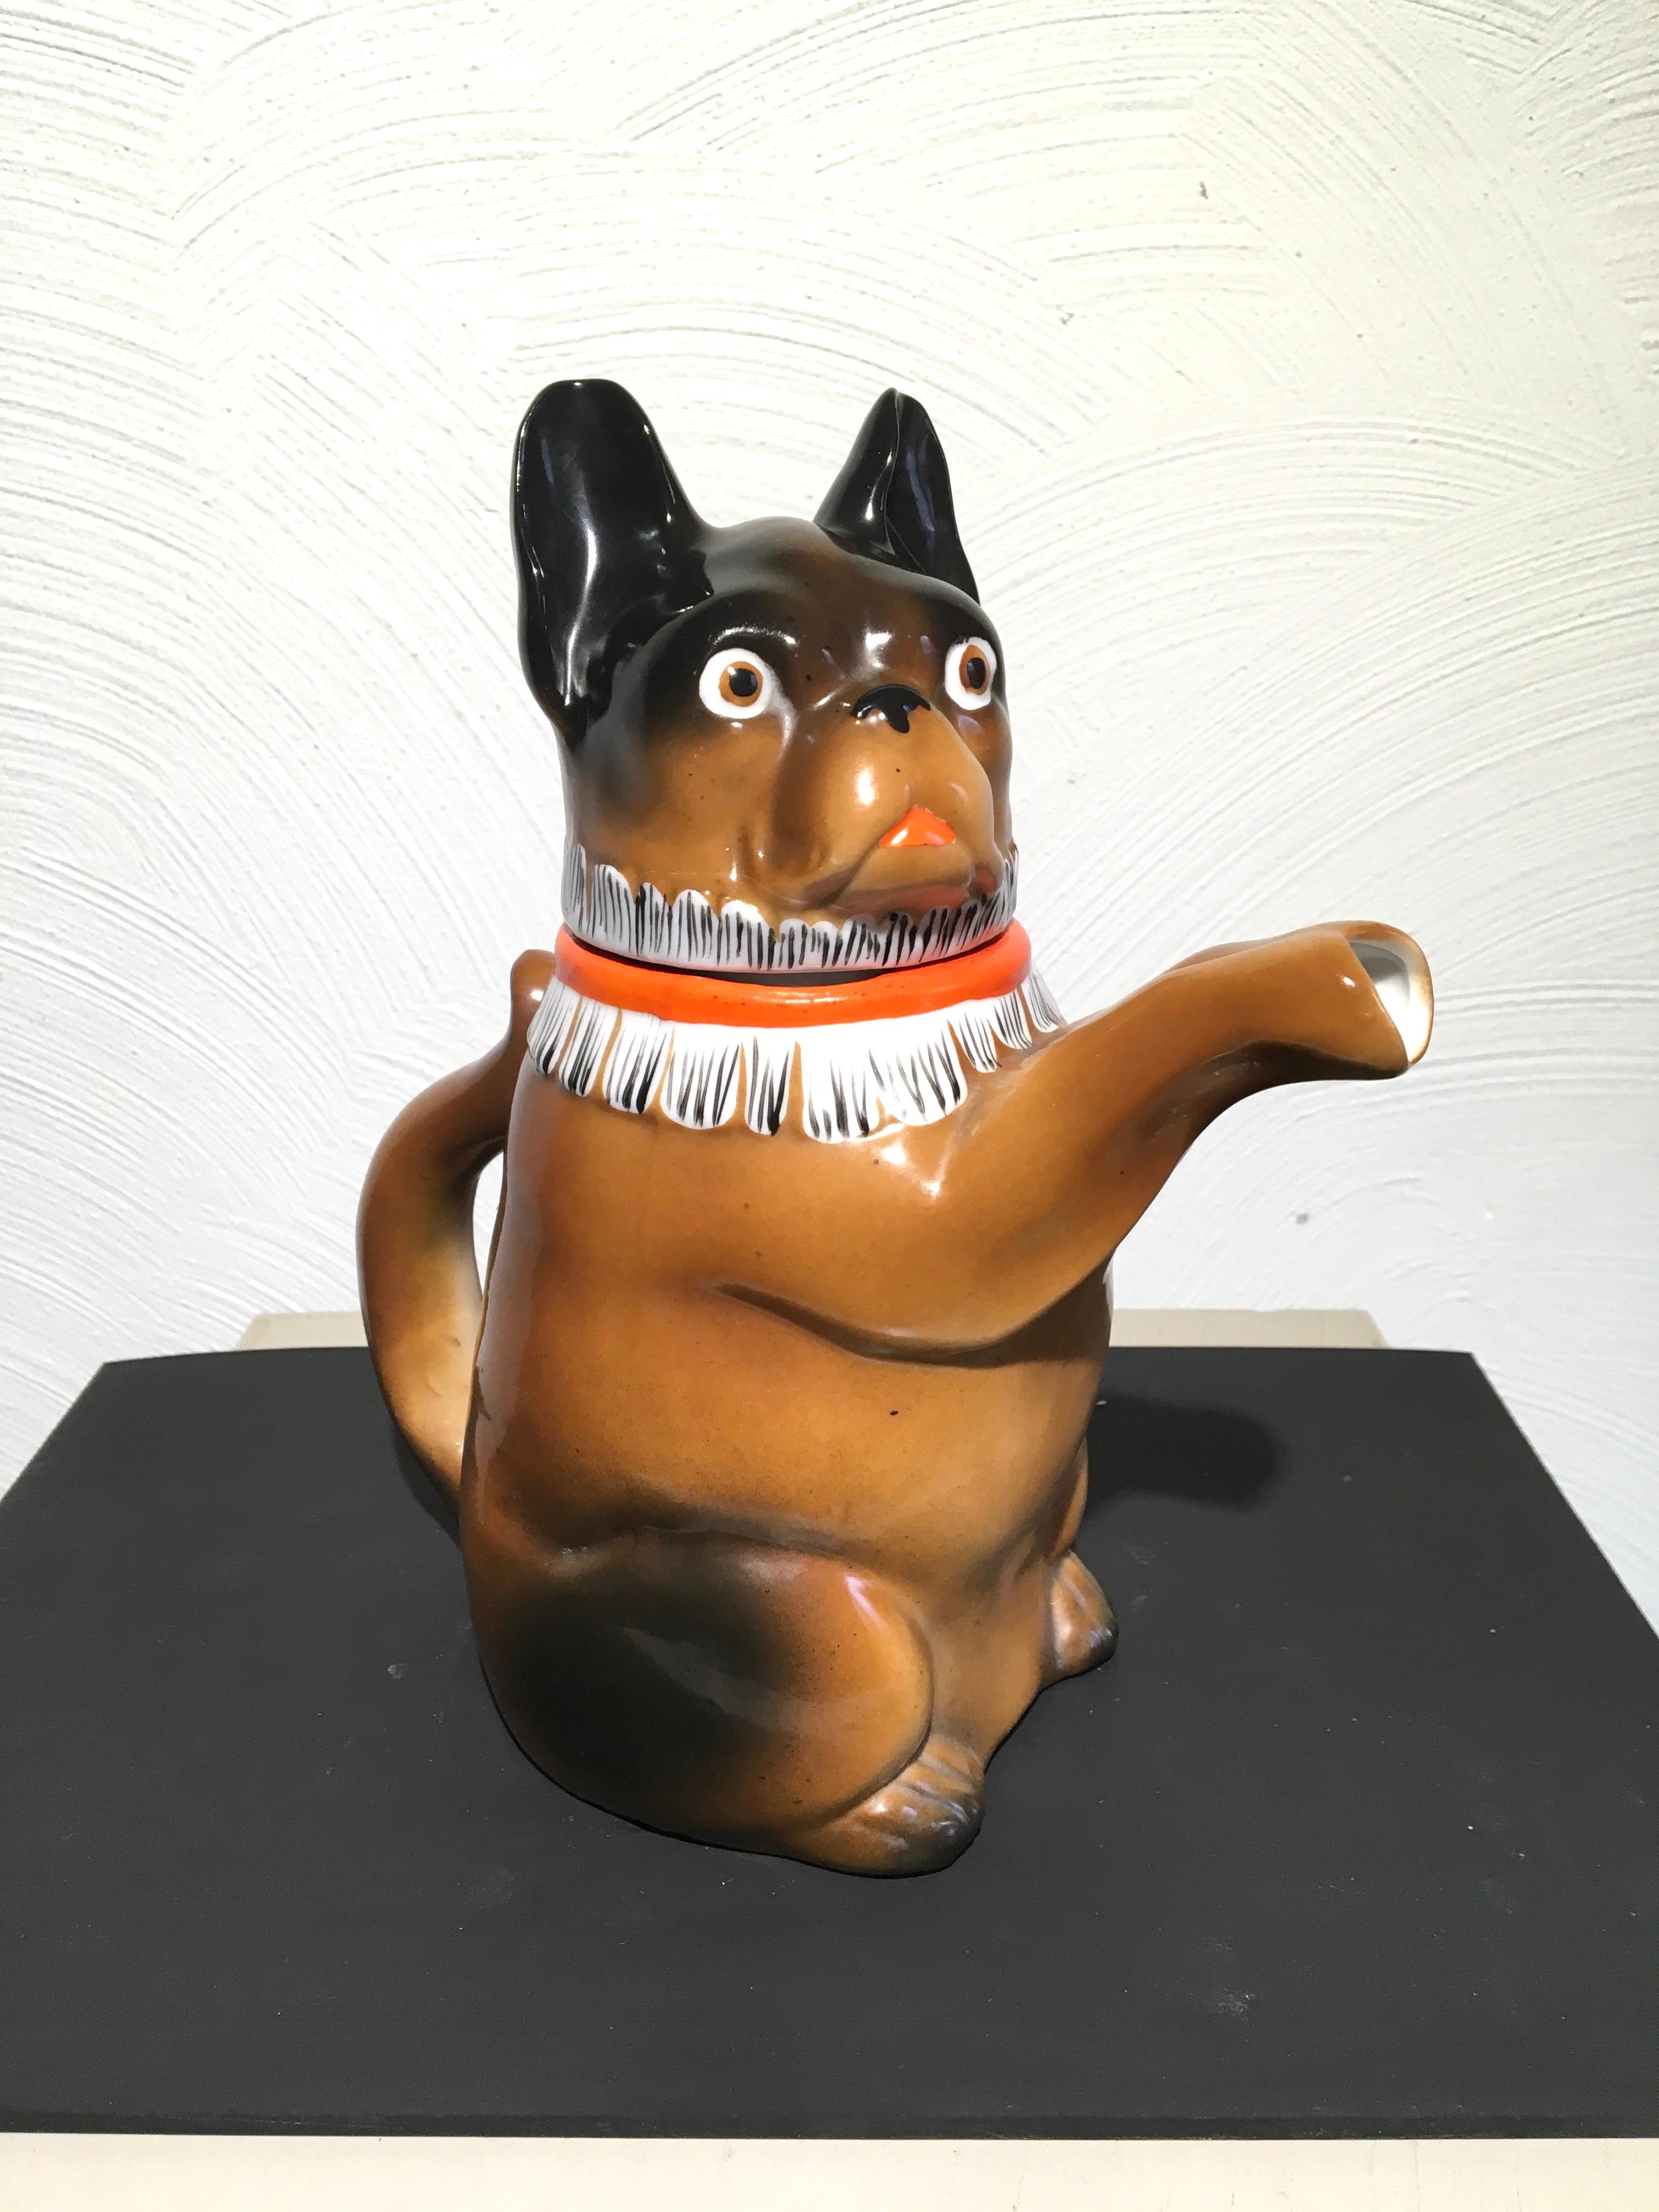 Art Deco Bulldog Teapot. 
French Bulldog Teapot - Jug - Pitcher from the 1930s.
A brown with dark brown French bulldog sculpture with a white and orange collar which has even the look of a badger collar. 
This Frenchie is sitting and has beautiful